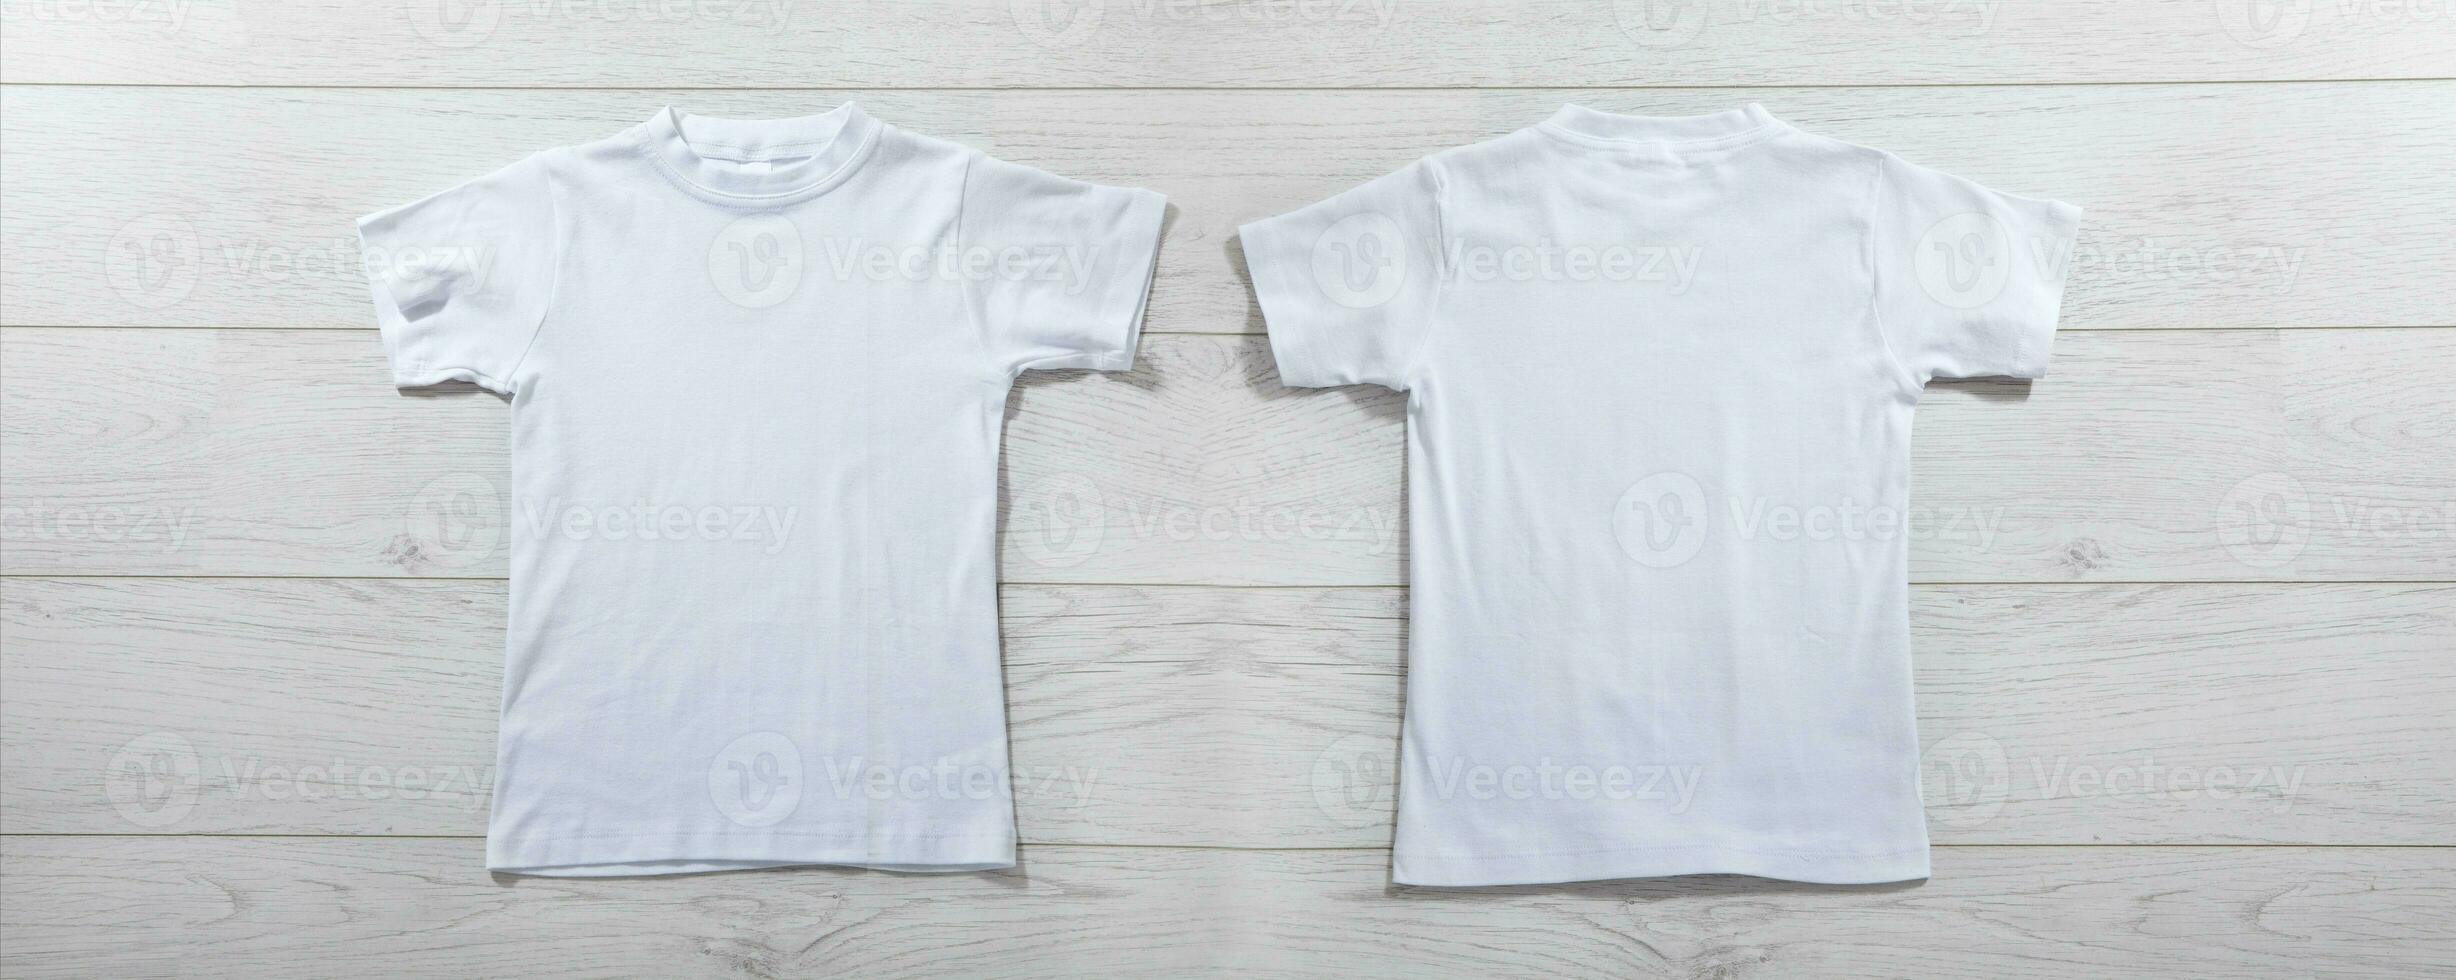 Front and back views on boys t-shirts on white wooden desk background. Mockup for design closeup photo